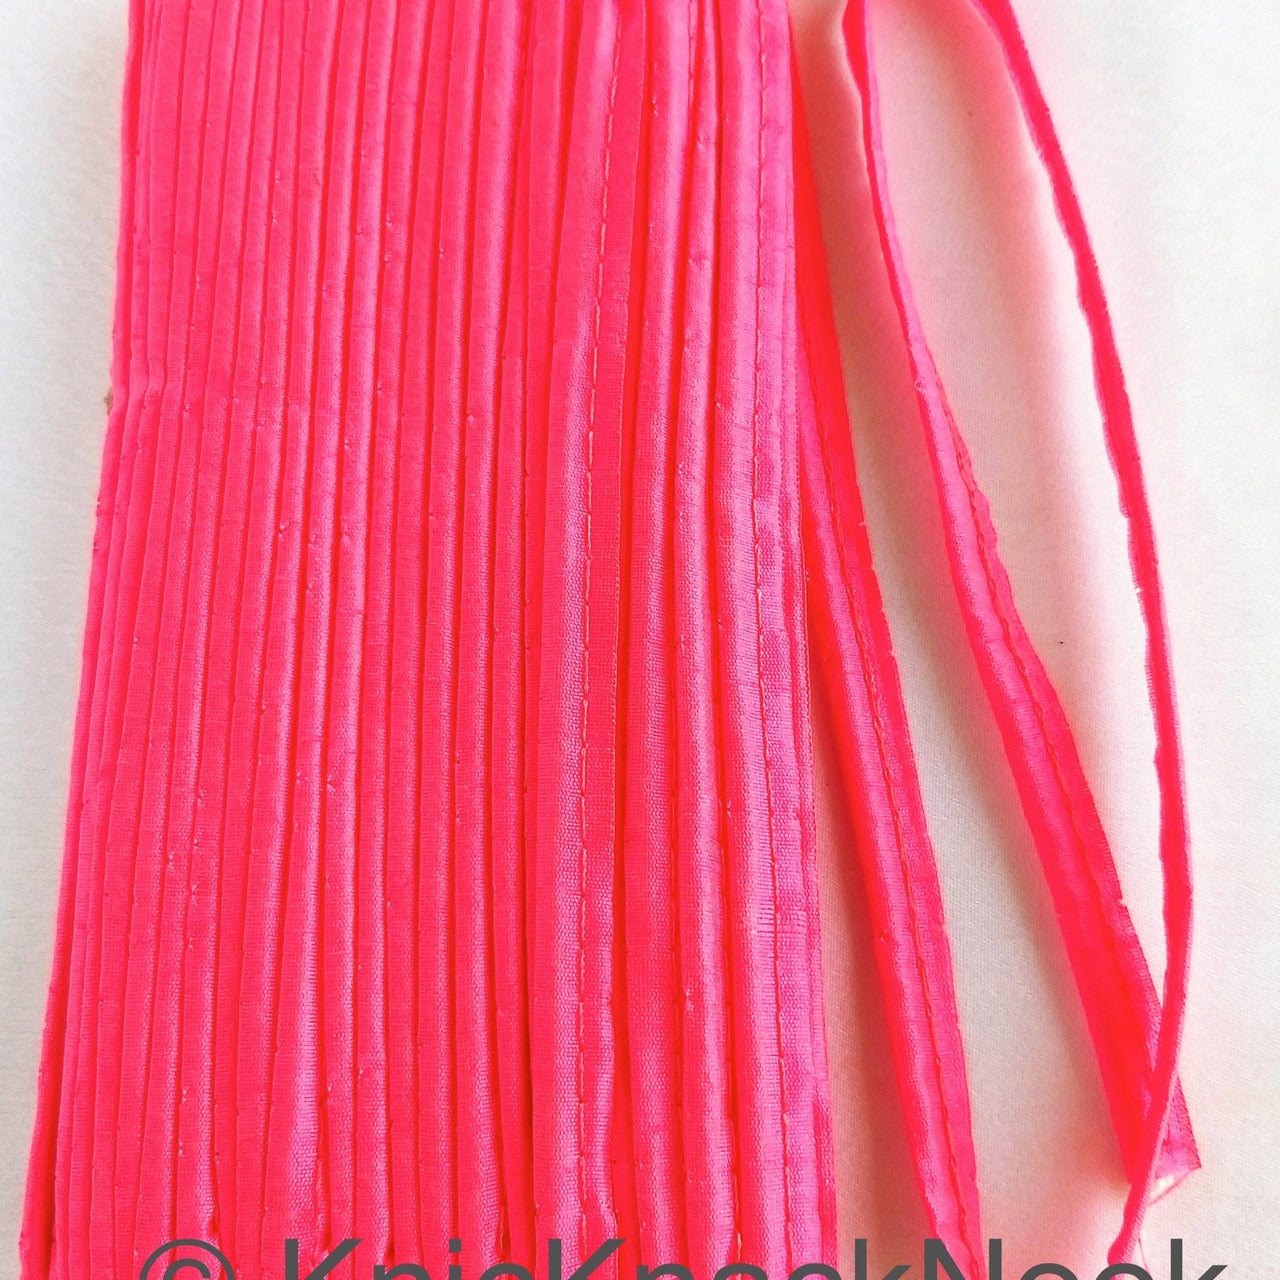 2mm Flanged Insertion Piping on 9mm Band, Watermelon Pink Art Silk Fabric Trim, Cord piping Trim